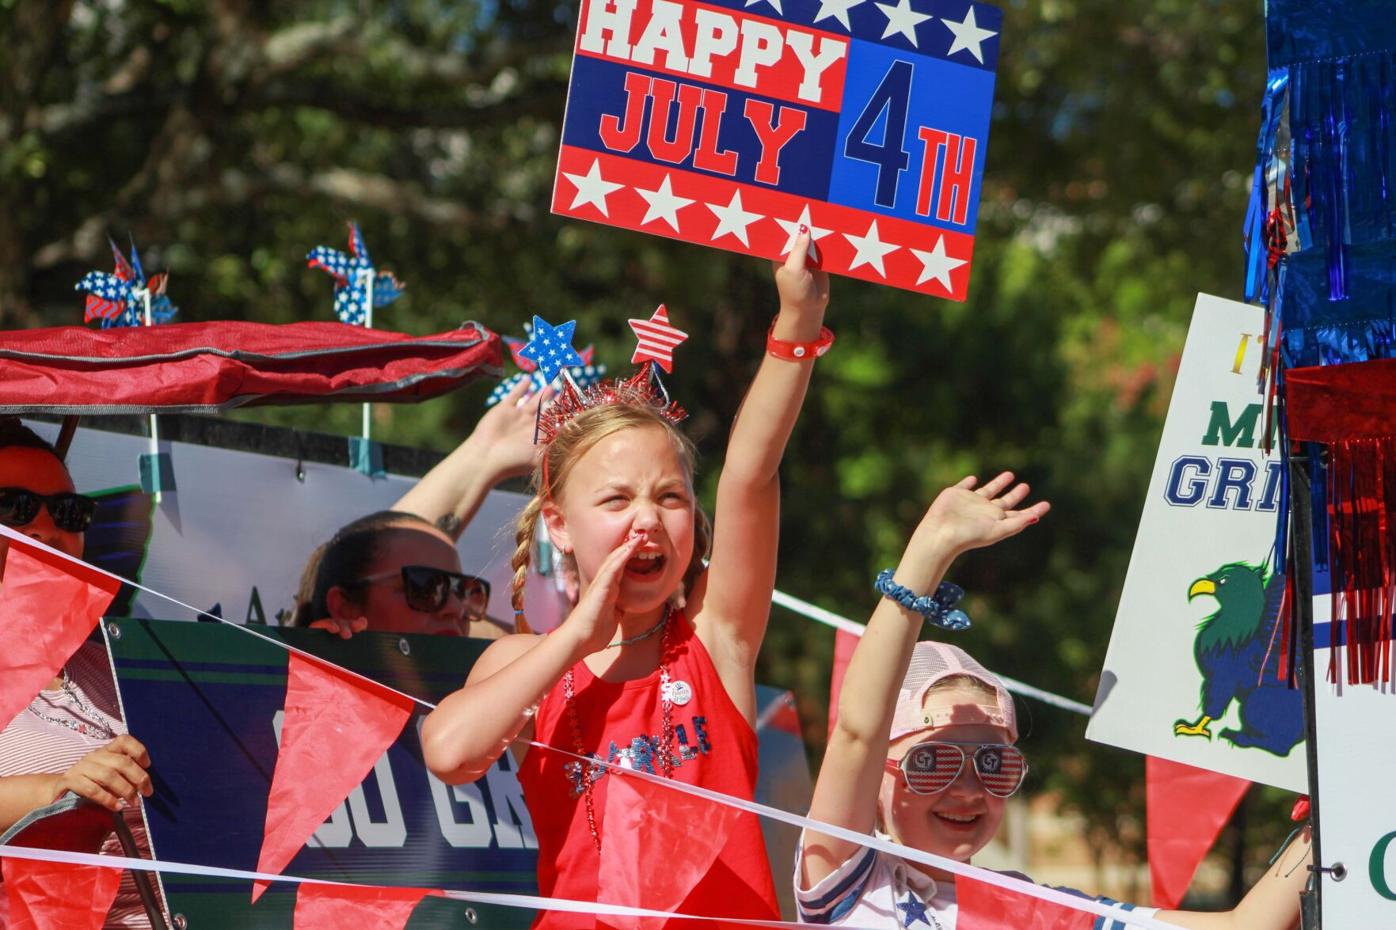 Parking, road closure, food trucks: What to know for Gardner's parade